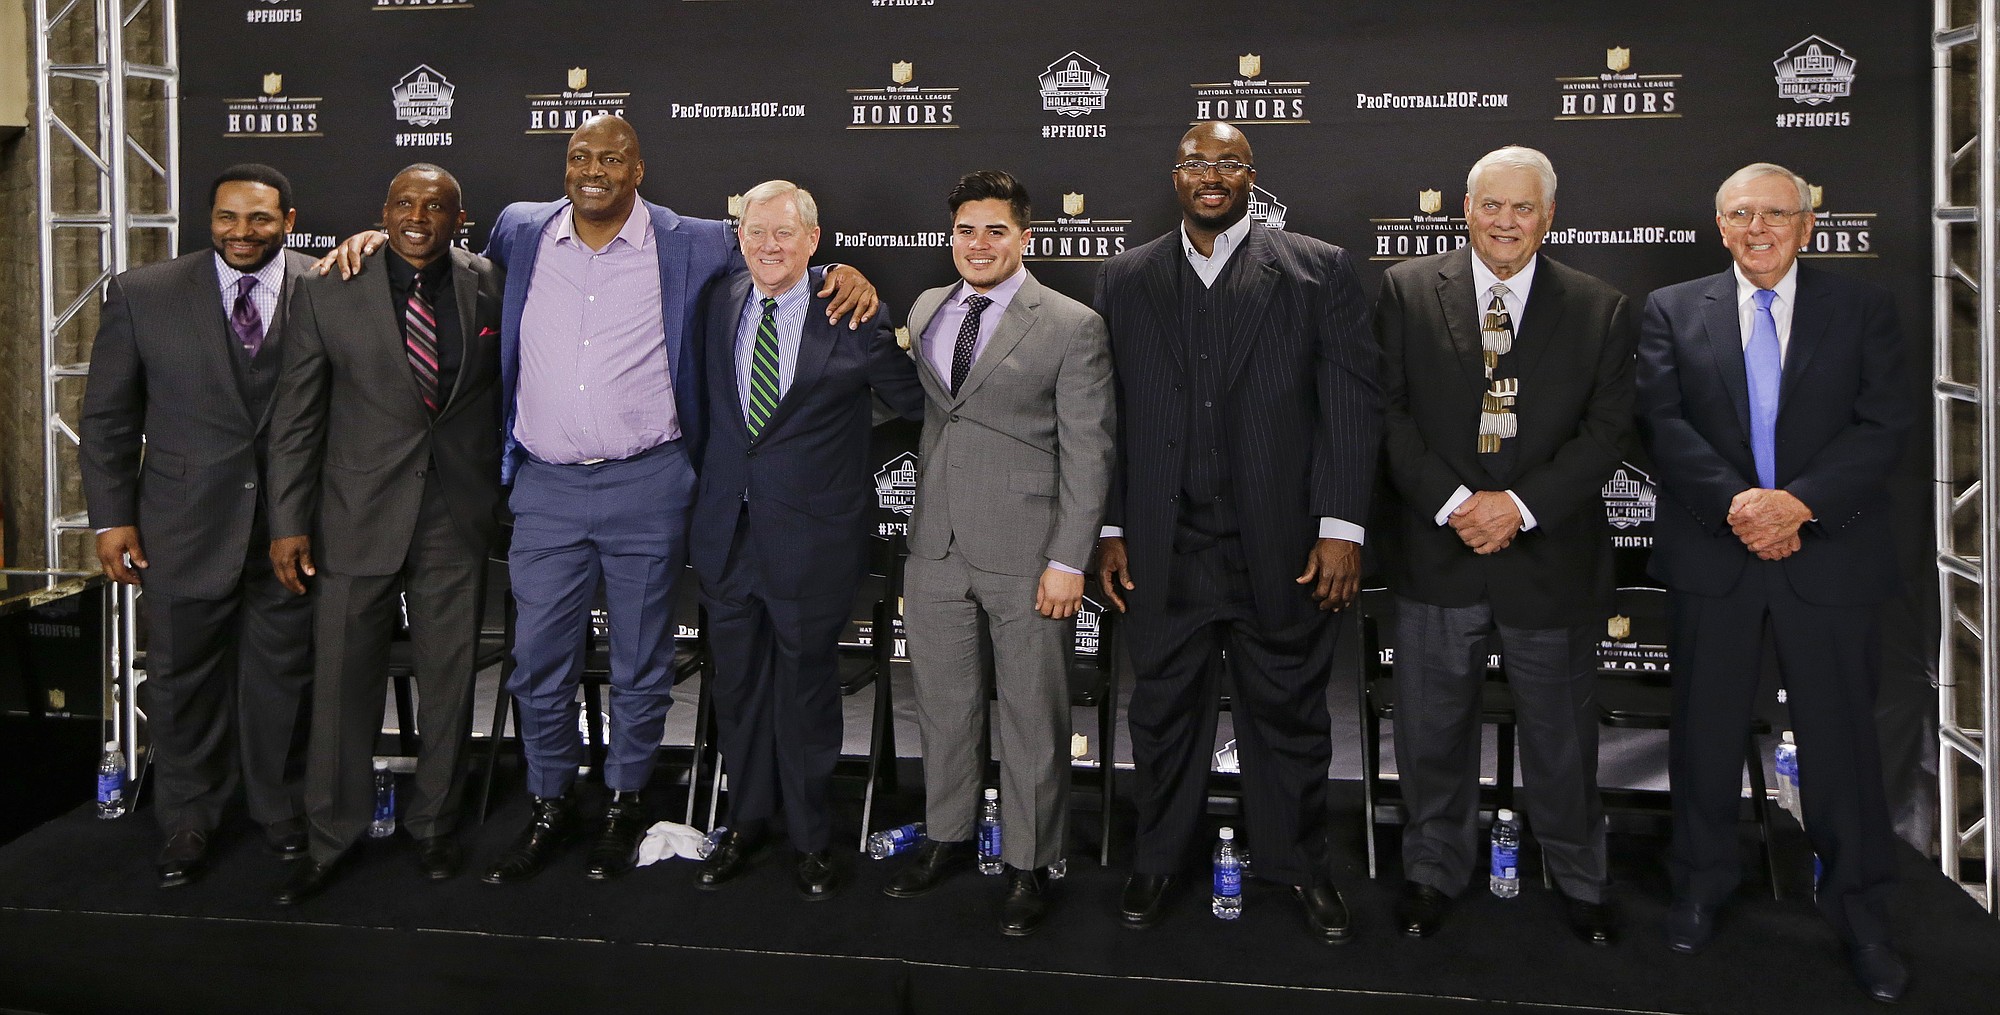 Members of the Pro Football Hall of Fame class of 2015 are introduced Saturday, Jan. 31, 2015, in Tempe, Ariz. From left are running back Jerome Bettis; wide receiver Tim Brown; defensive end and linebacker Charles Haley; Bill Polian; Tyler Seau, son of the late linebacker Junior Seau, on behalf of his father; guard Will Shields; center Mick Tingelhoff; and Ron Wolf.